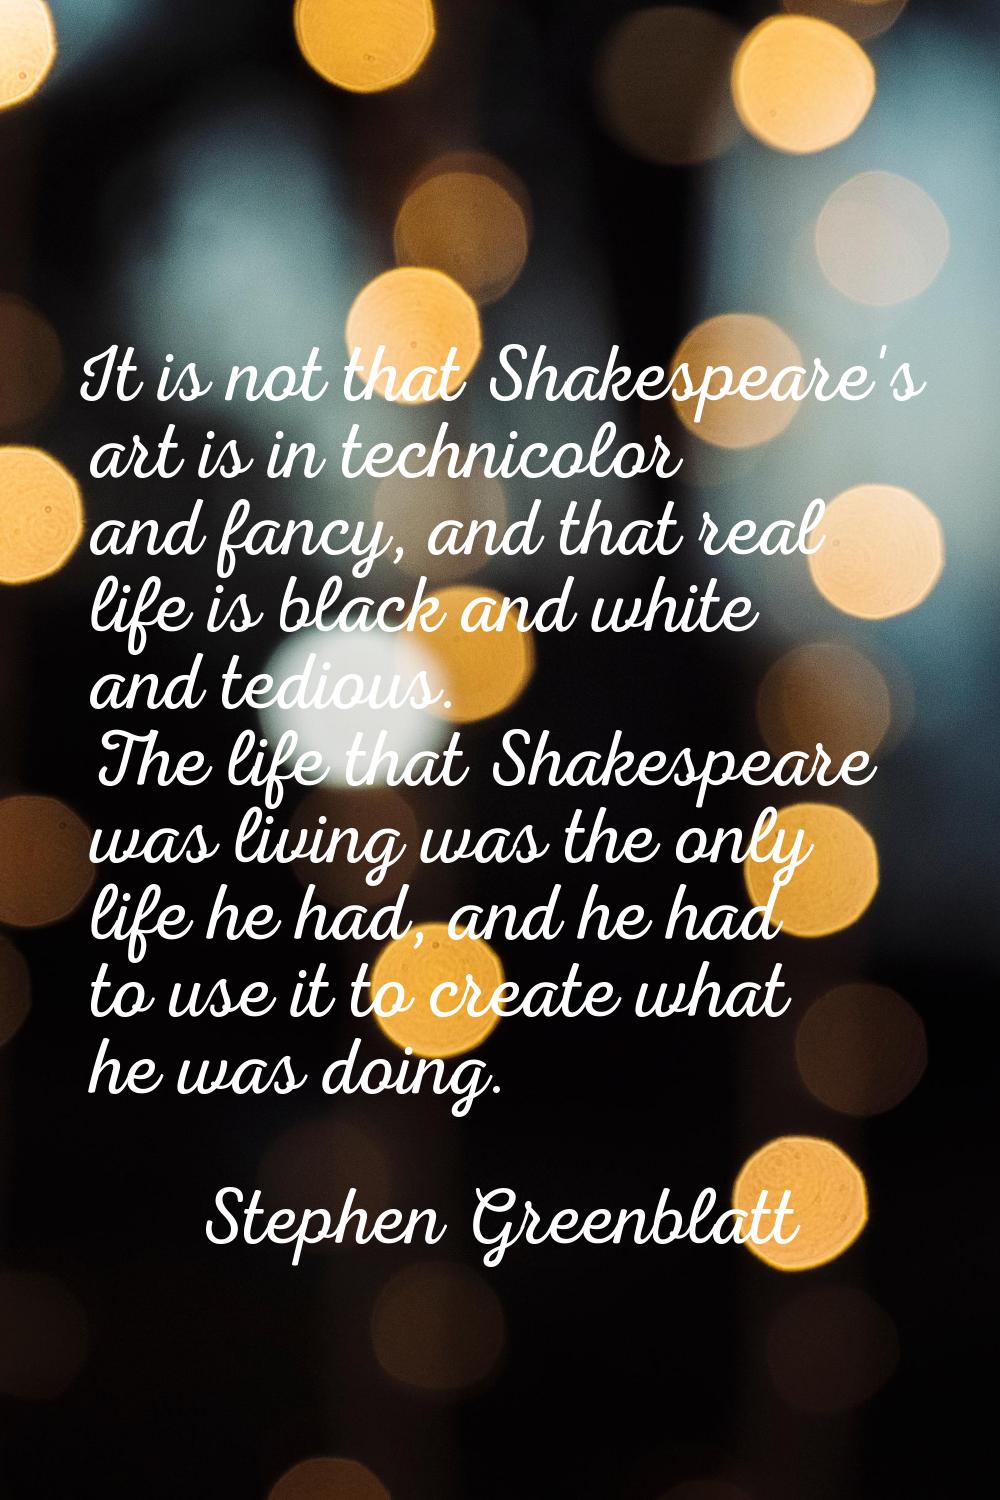 It is not that Shakespeare's art is in technicolor and fancy, and that real life is black and white